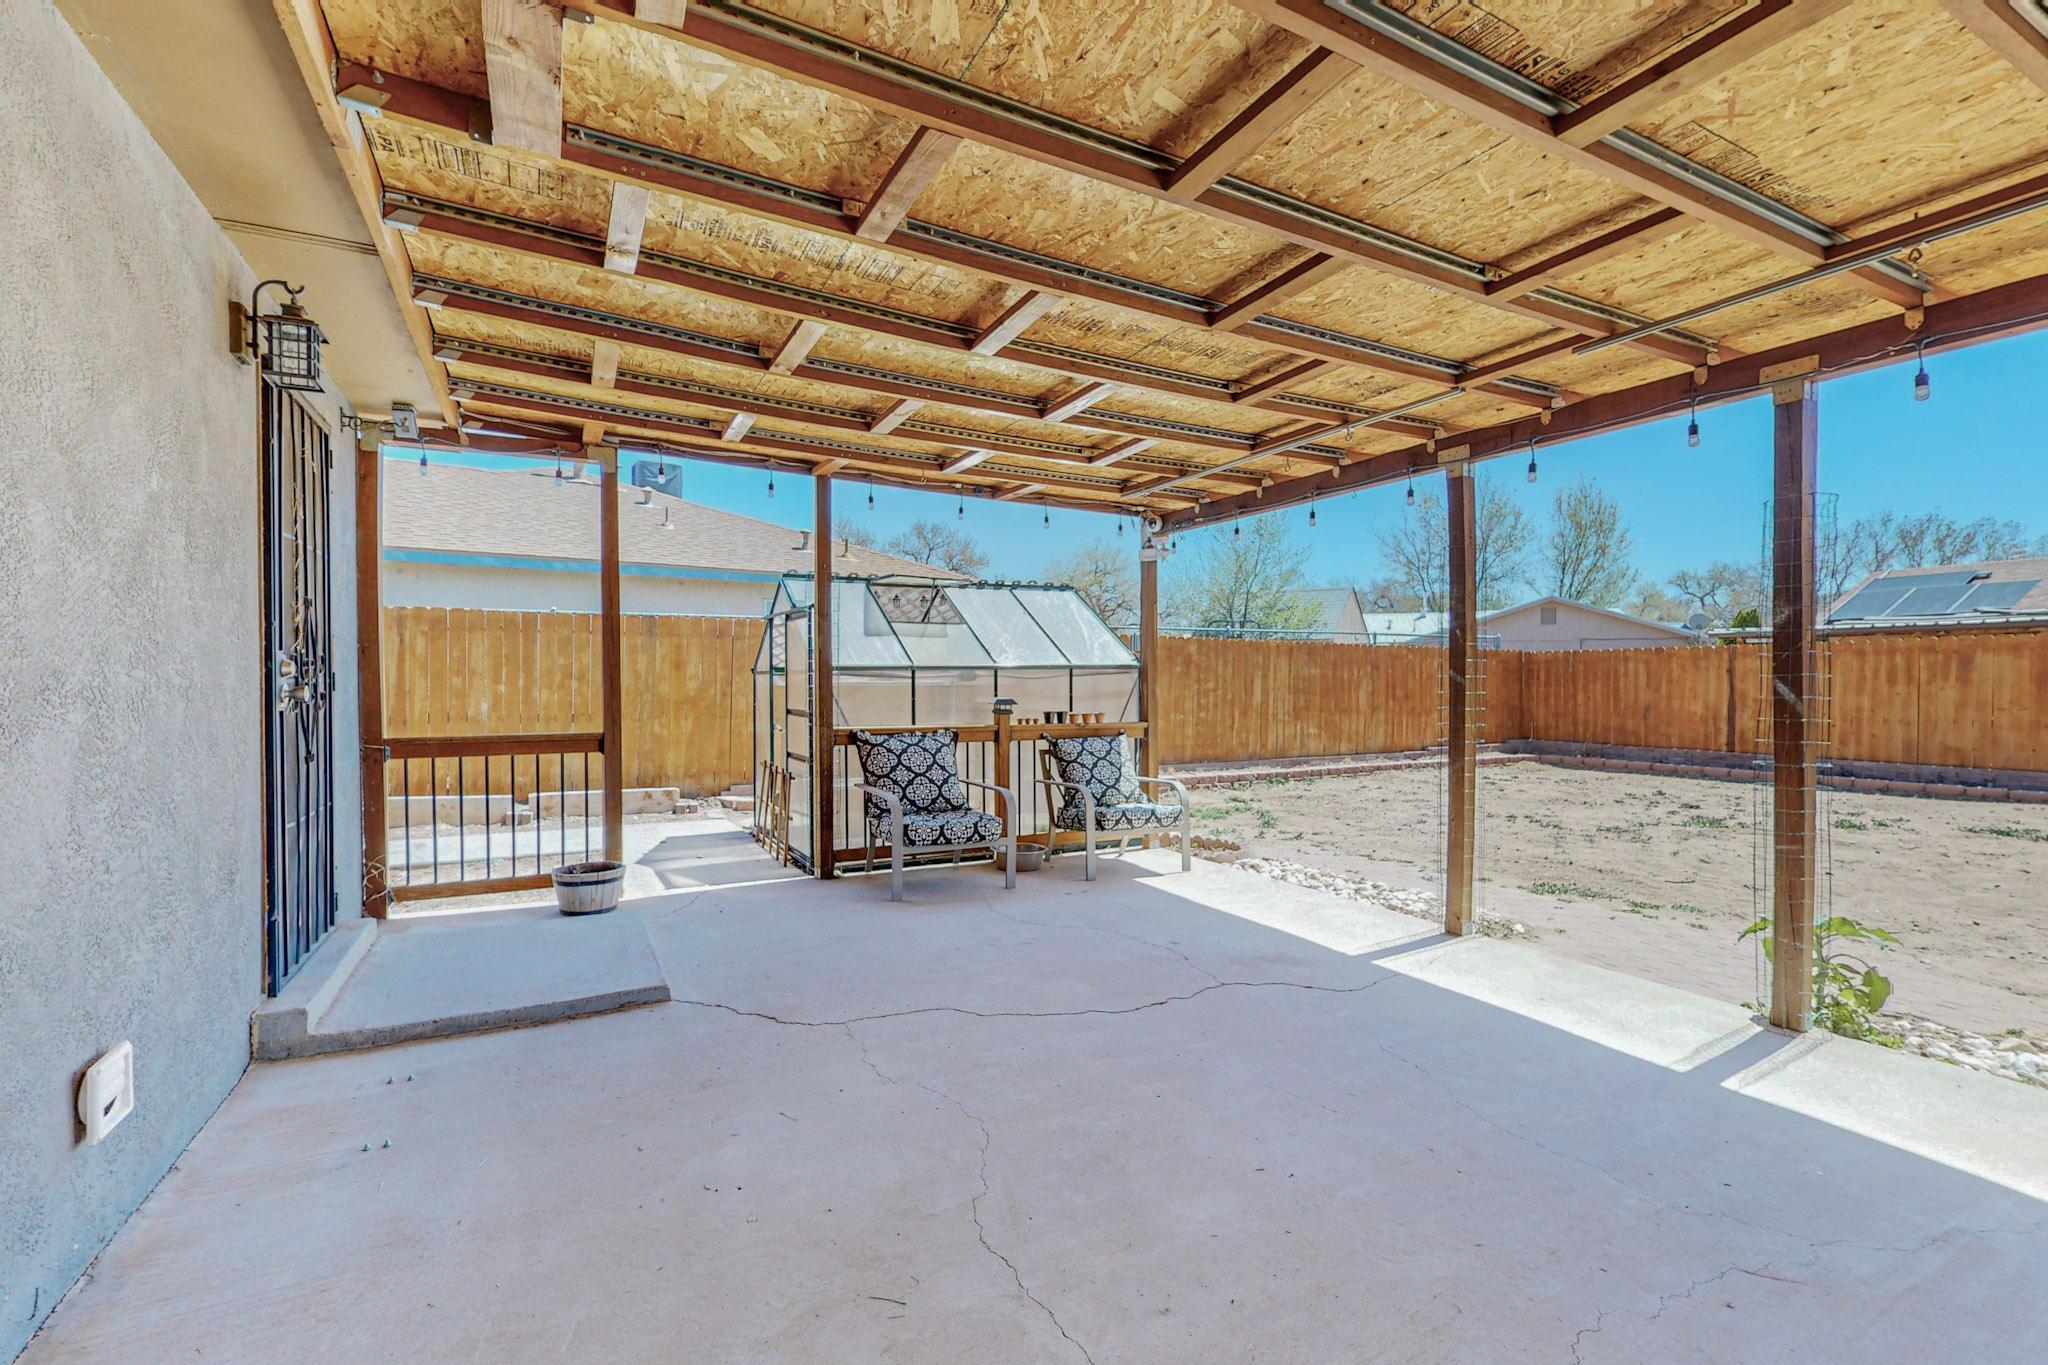 1141 Willow Court SE, Los Lunas, New Mexico 87031, 3 Bedrooms Bedrooms, ,2 BathroomsBathrooms,Residential,For Sale,1141 Willow Court SE,1061473